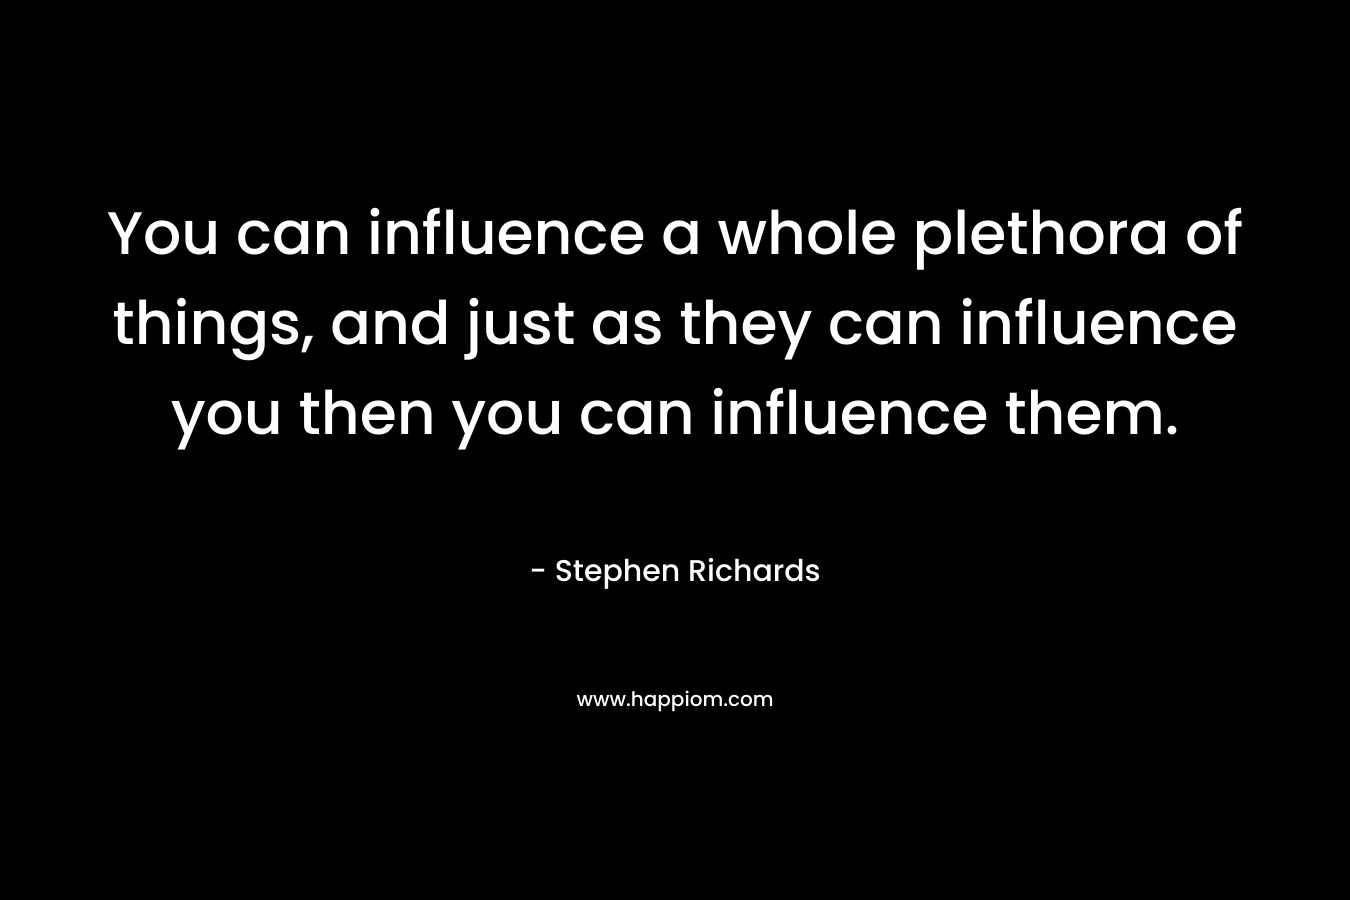 You can influence a whole plethora of things, and just as they can influence you then you can influence them.